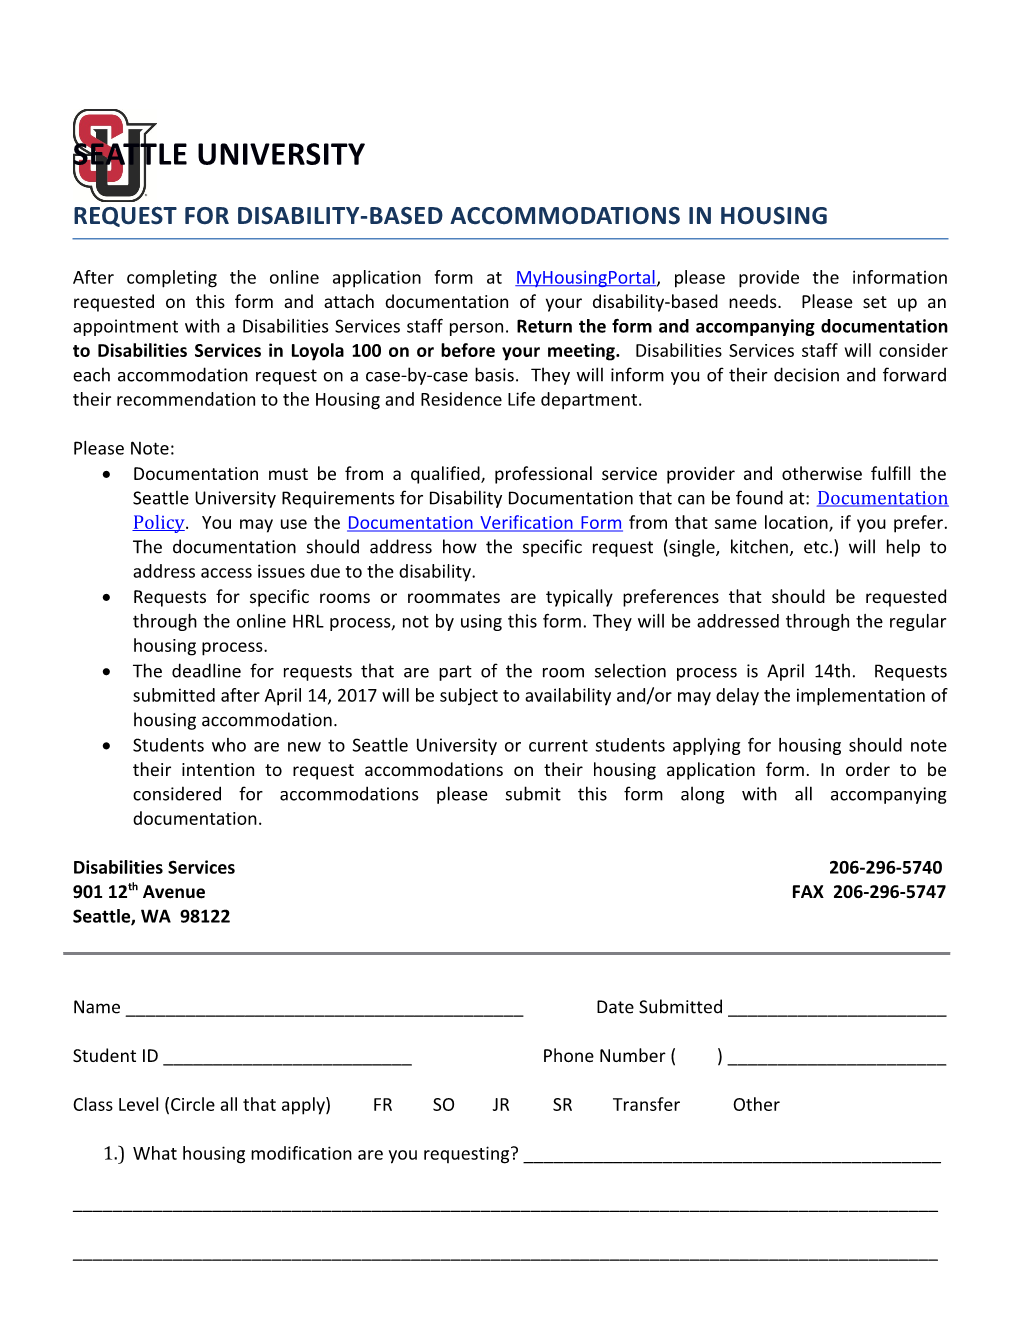 Request for Disability-Based Accommodations in Housing